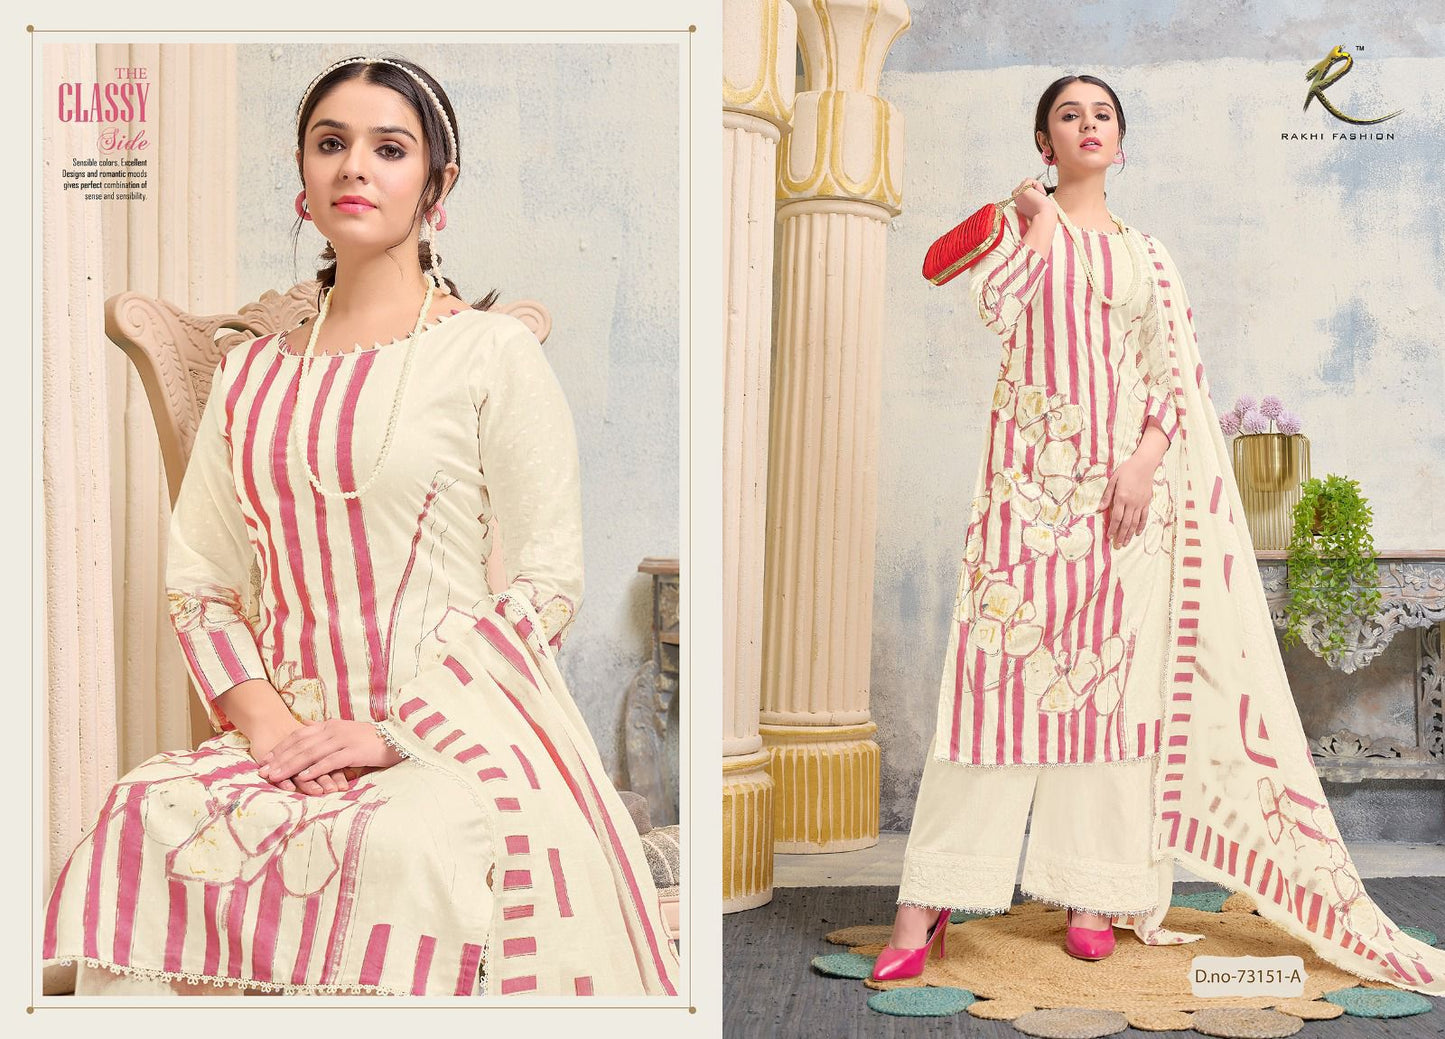 The Artistic Look Rakhi Fashion Cotton Plazzo Style Suits